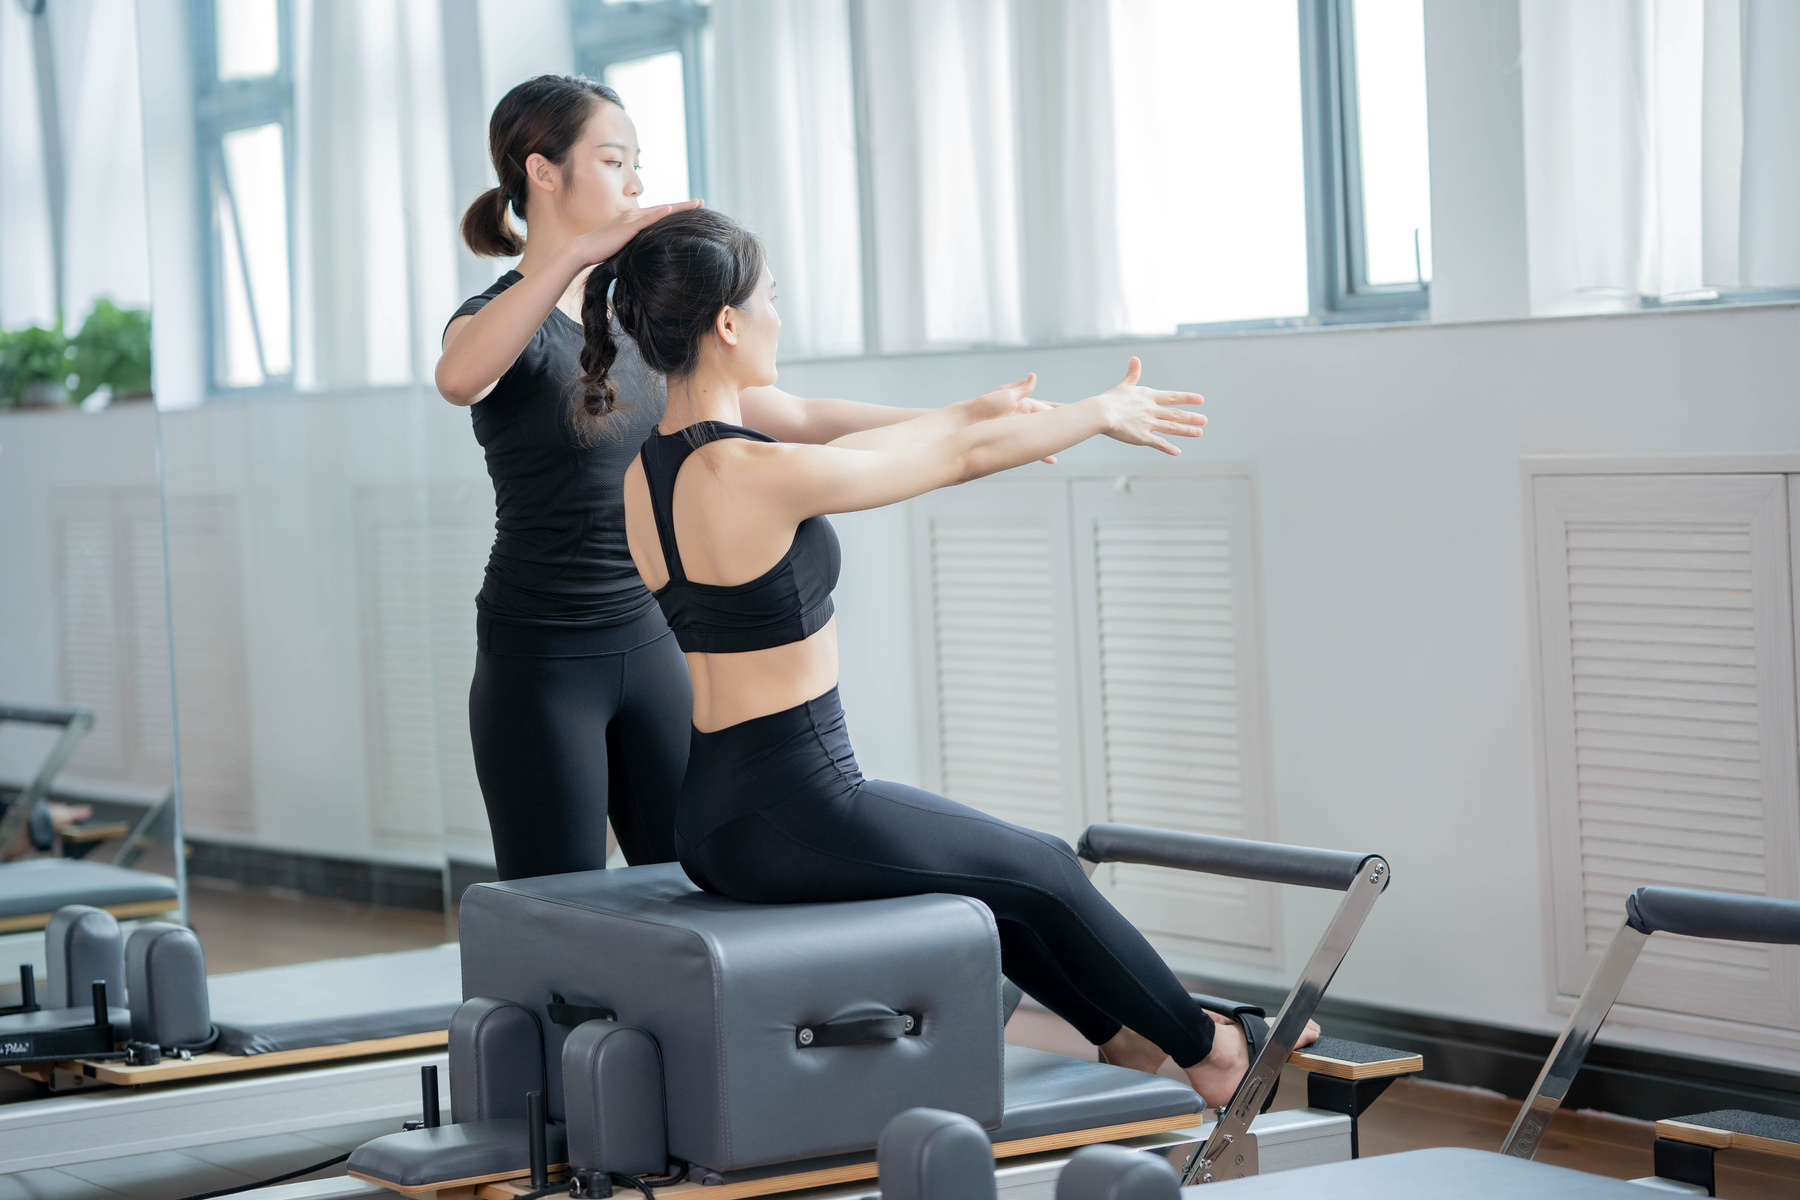 Gym Instructor assisting a Woman 